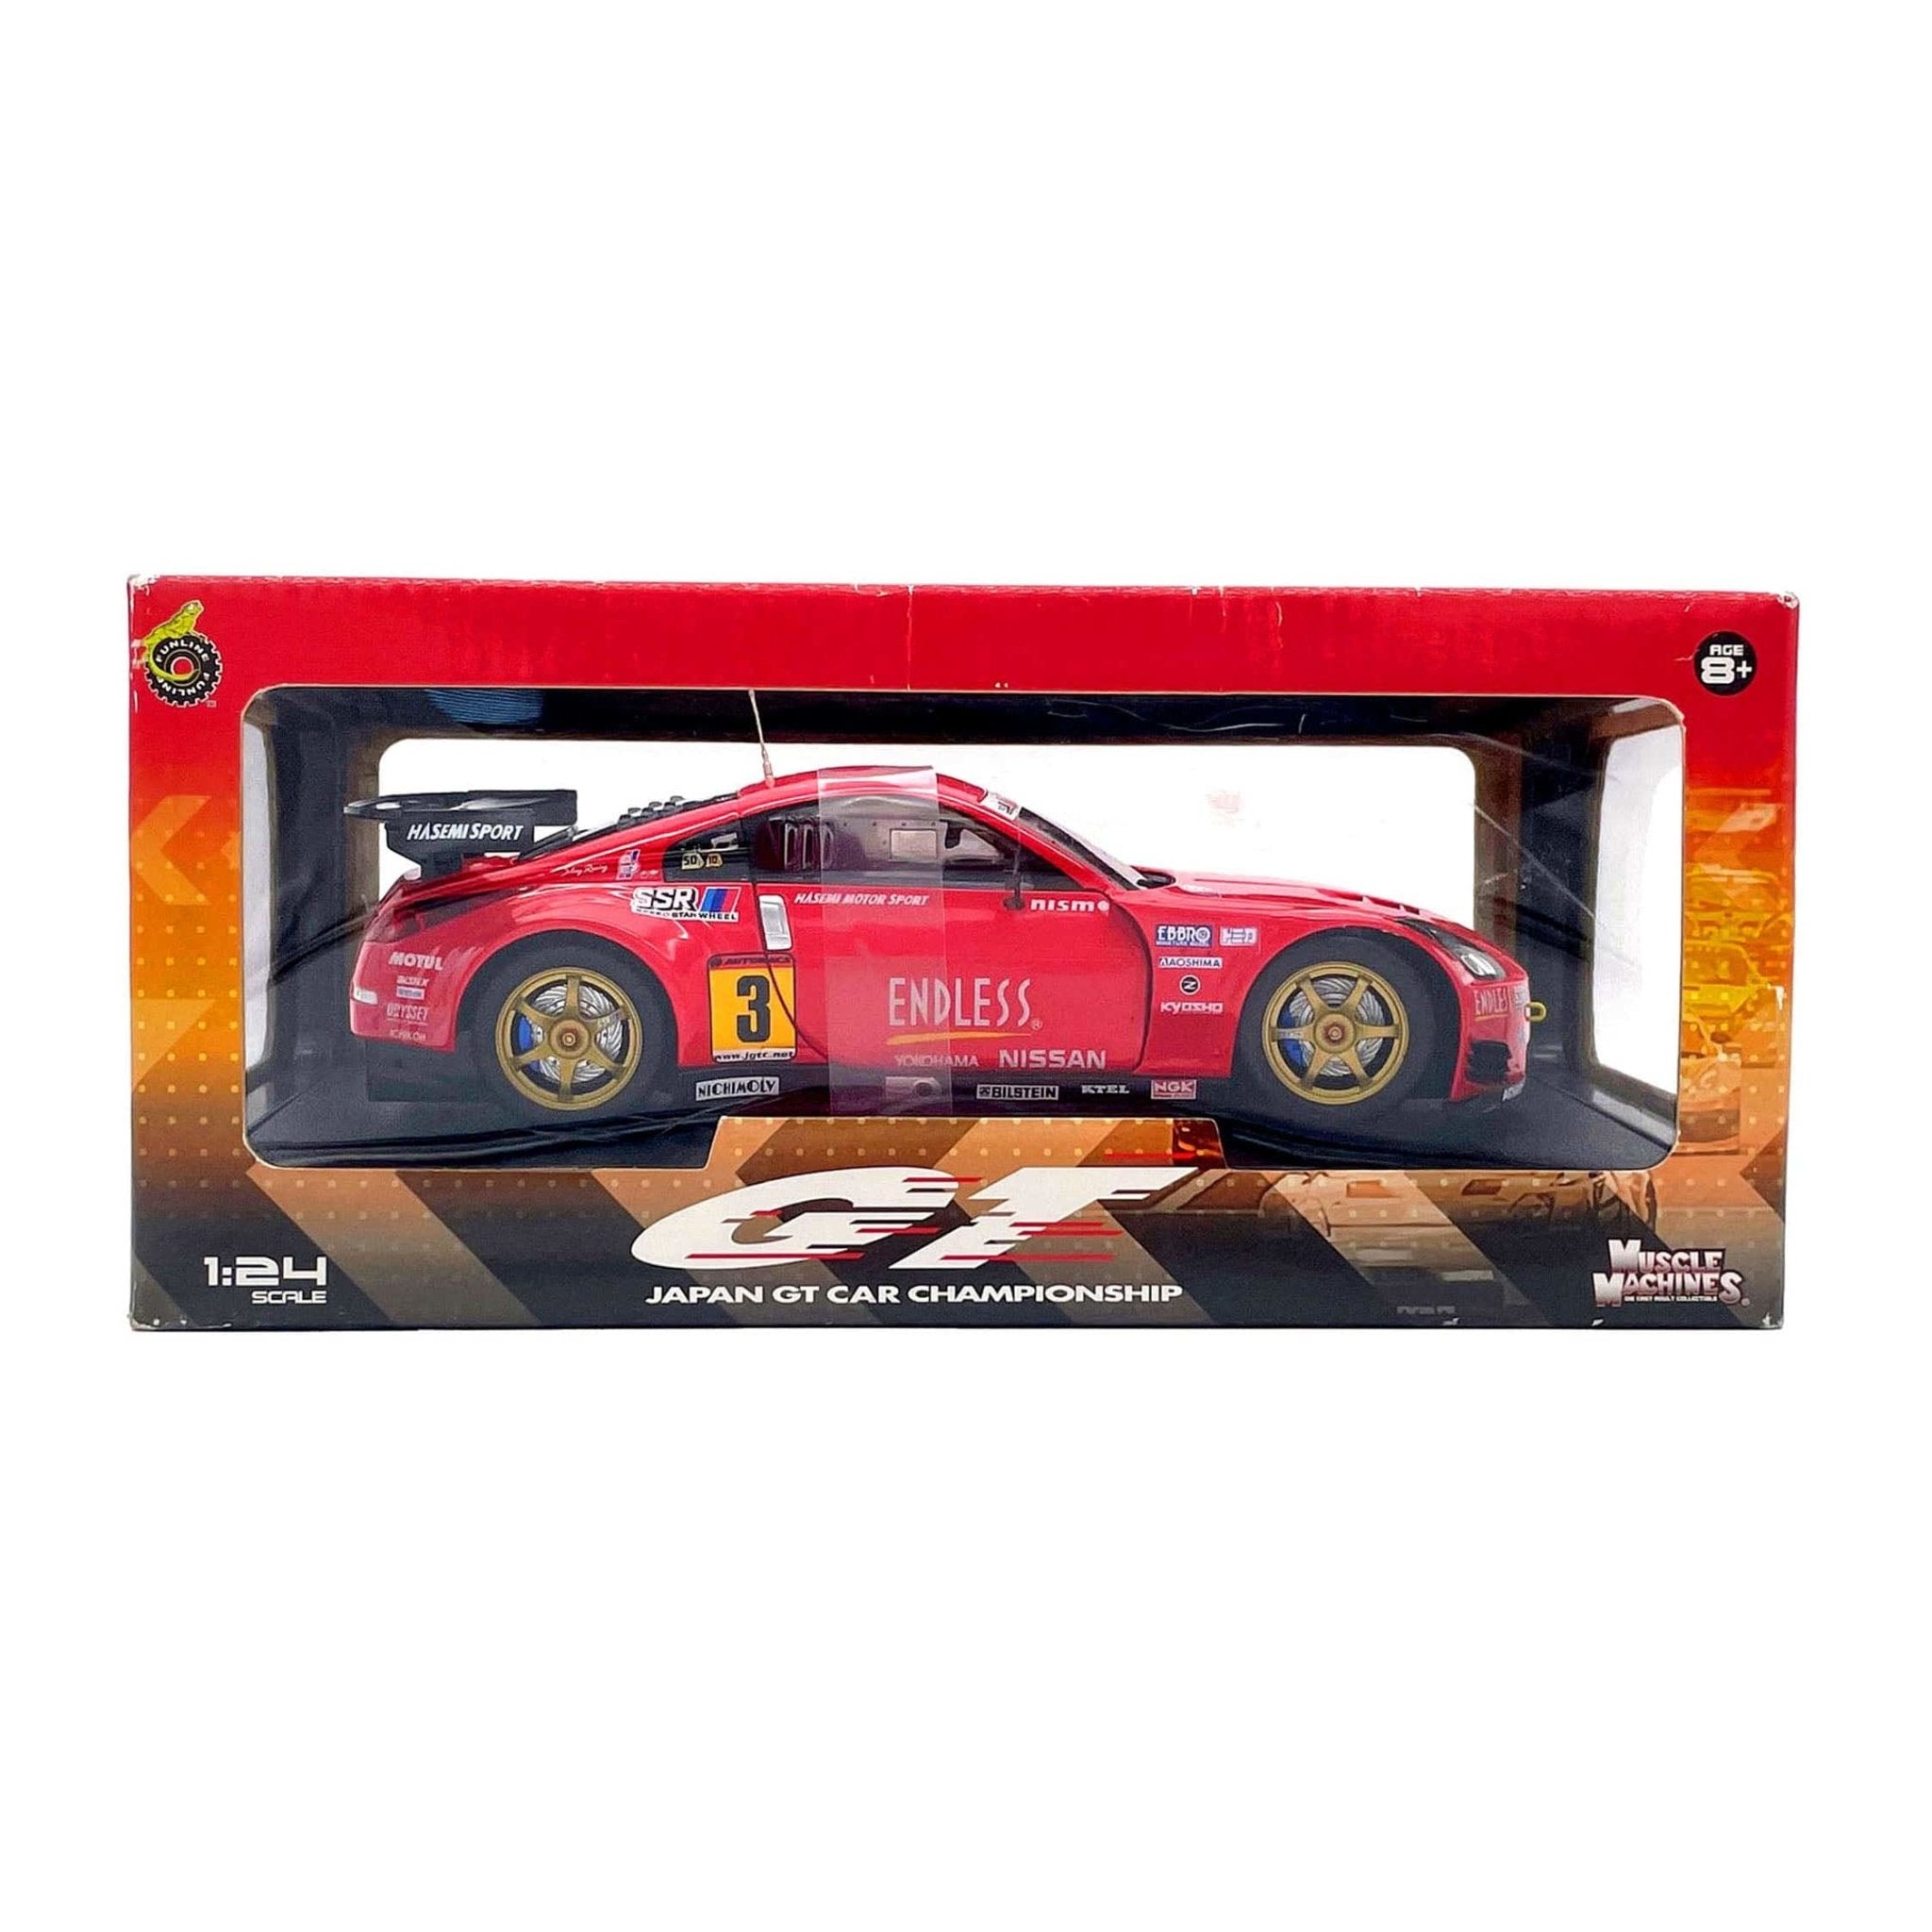 Rare Muscle Machines Japan GT Car Hasemisport Endless Z Diecast 1:24